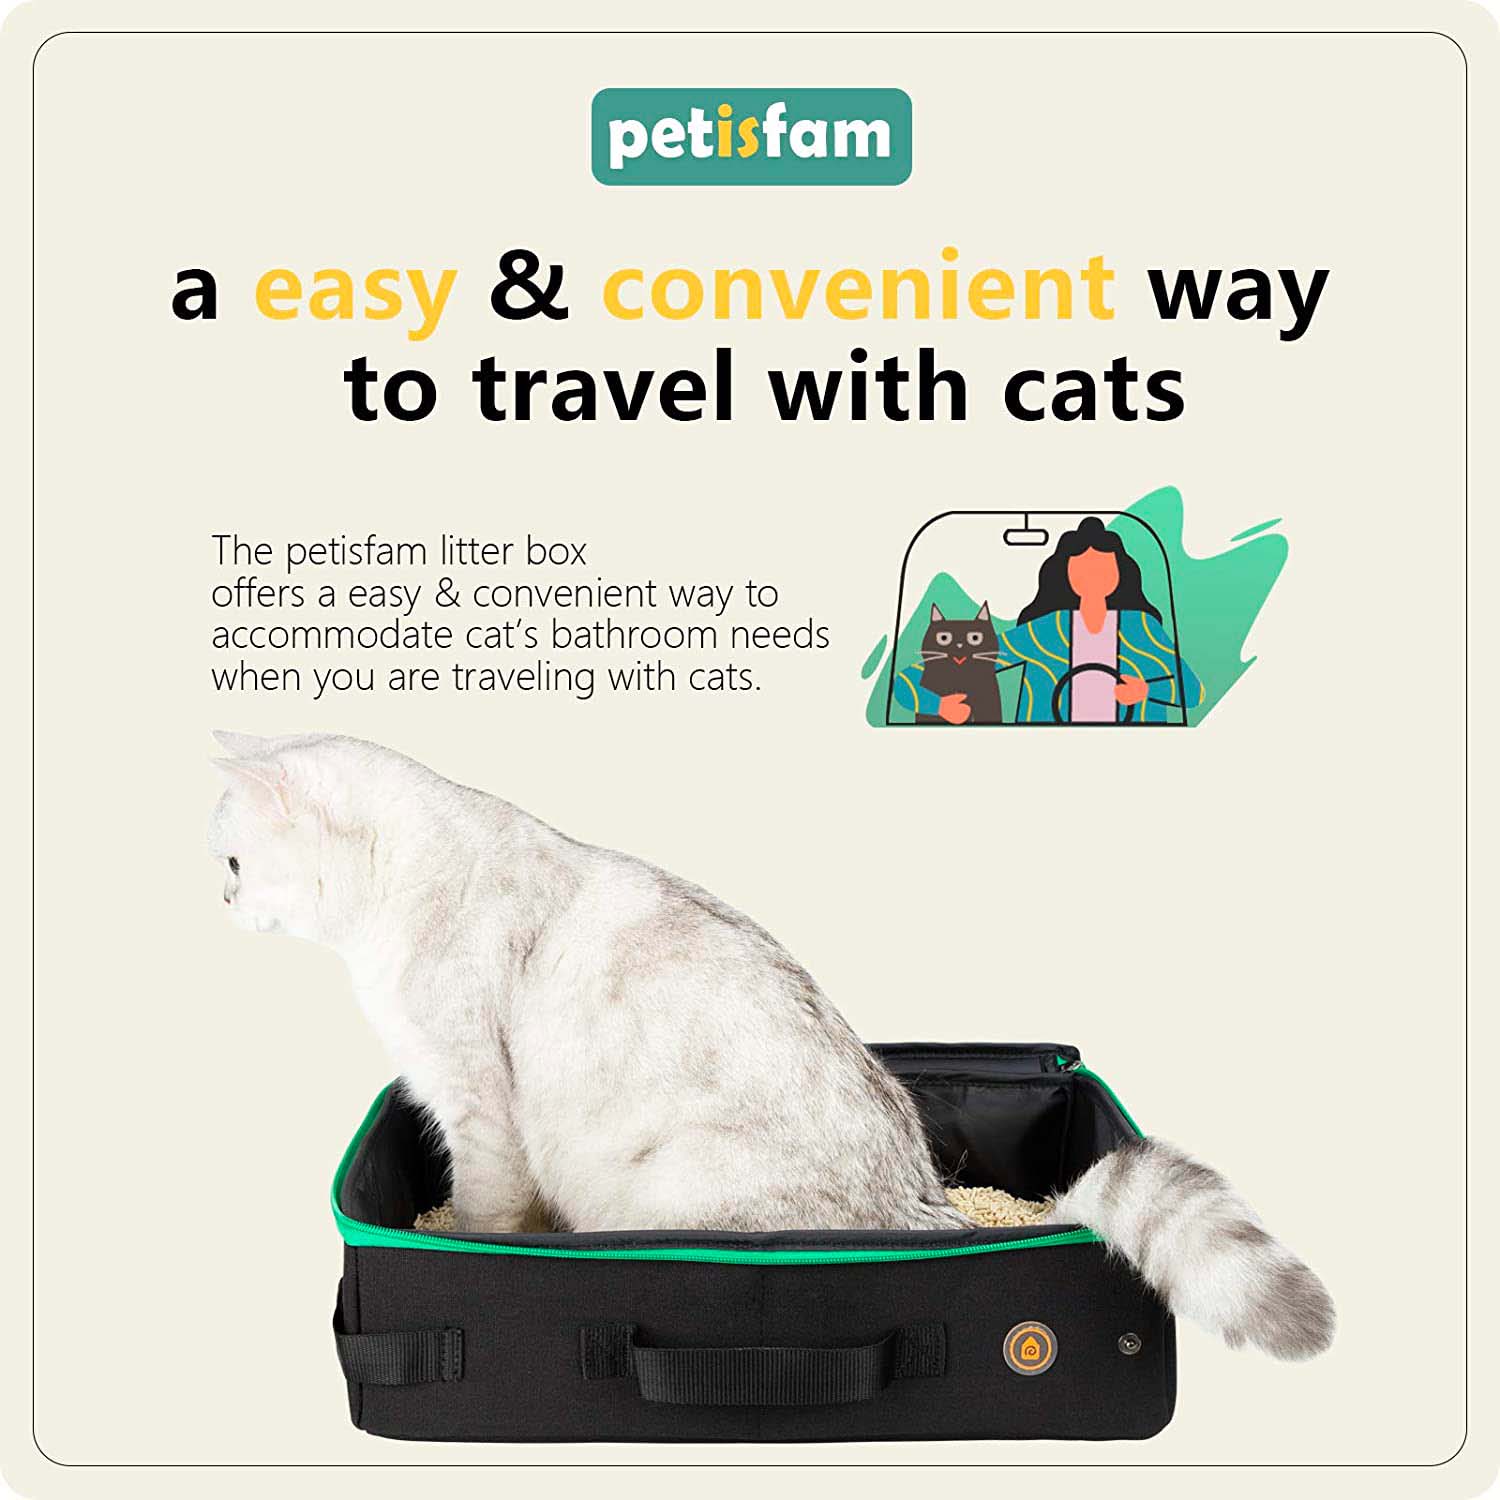 Portable litter box for cats traveling